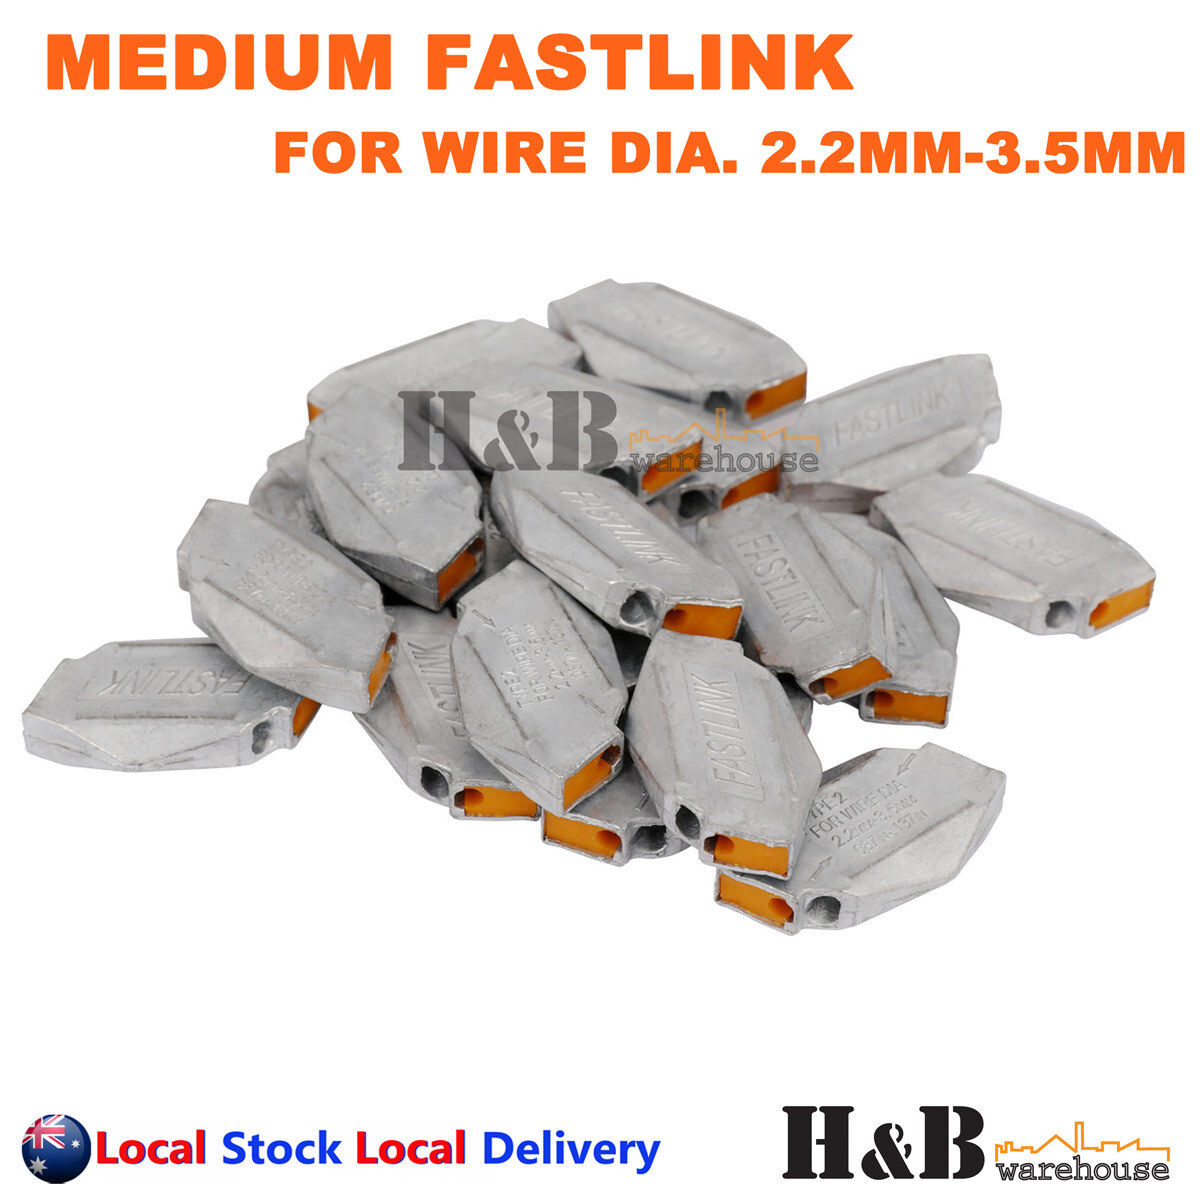 40X Medium Fastlink Wire Joiners Fence Fencing Joiner Works Gripple Tensioning